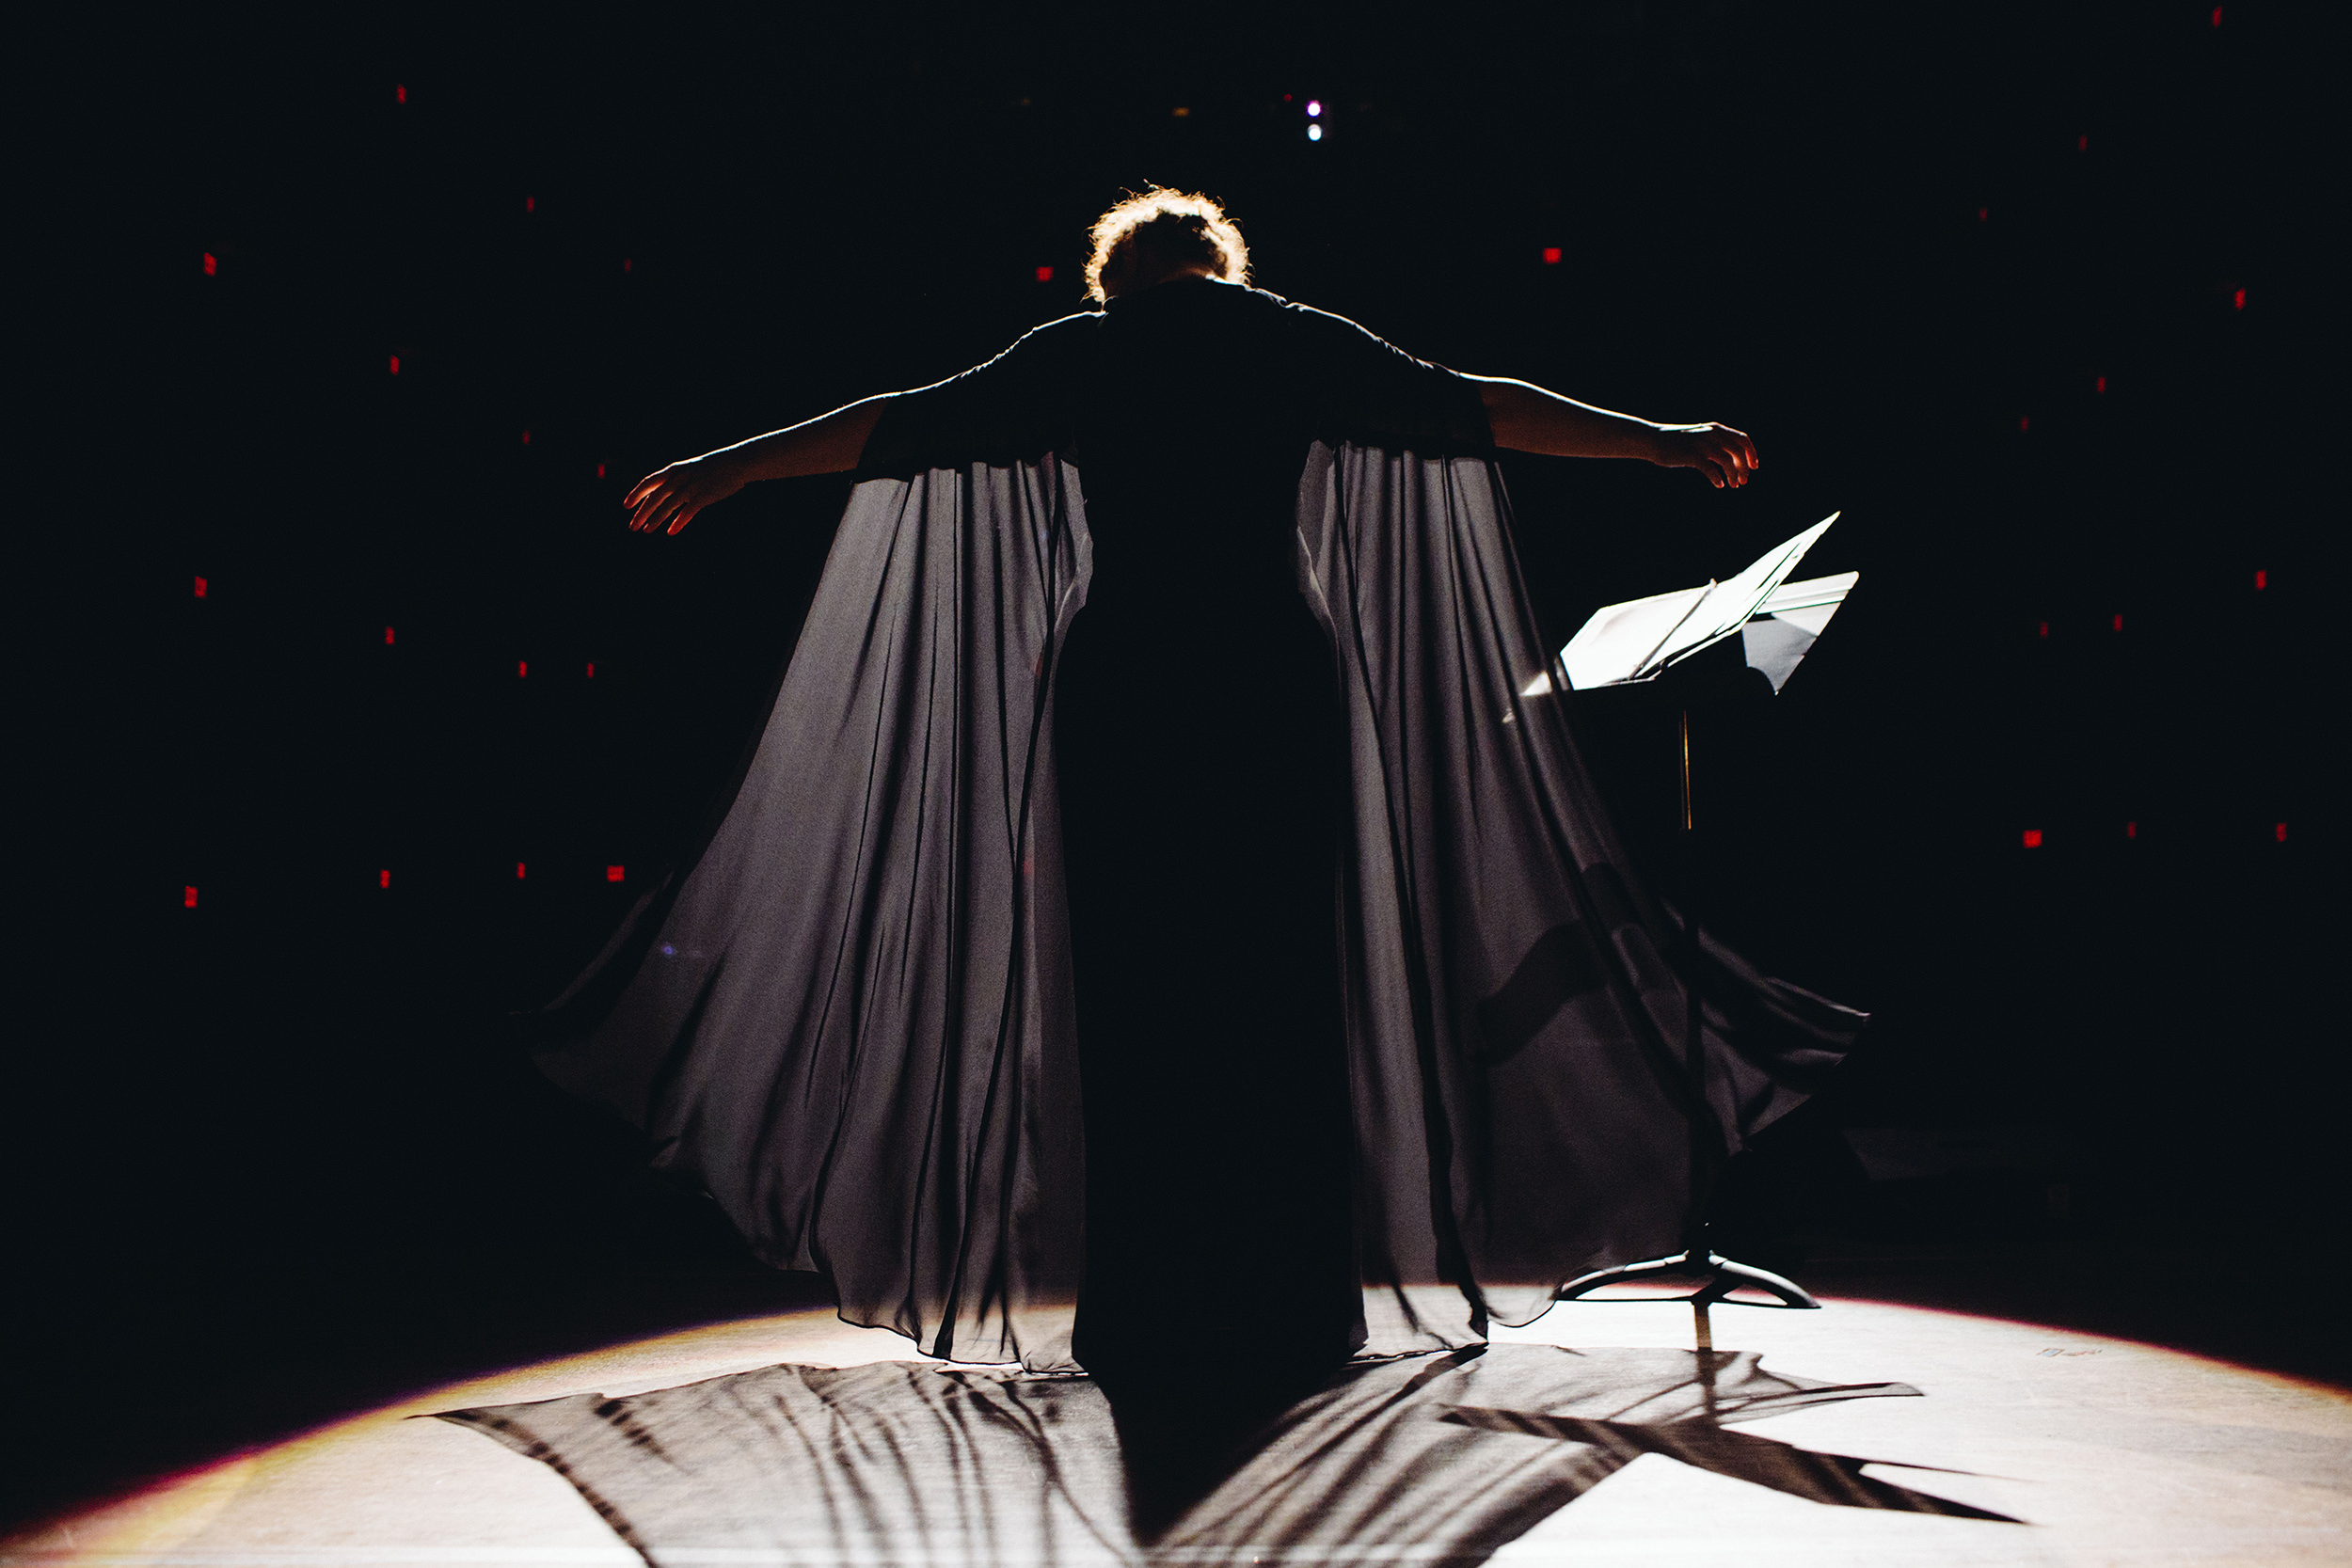 A performer takes a bow on stage.